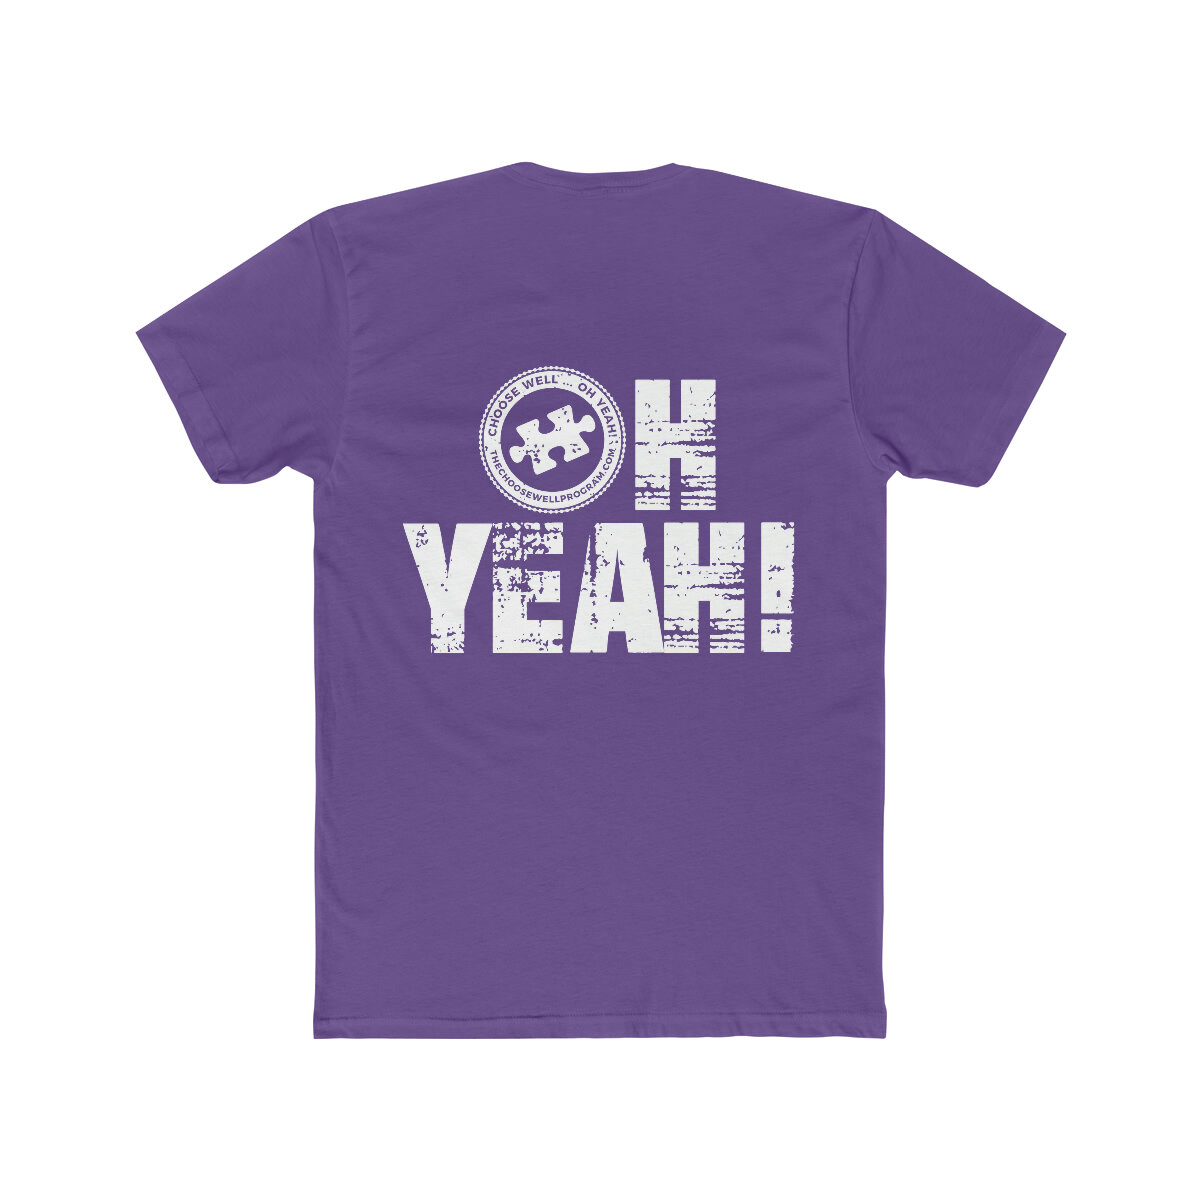 Adult Choose Well - Oh Yeah Cotton Crew Tee — The Choose Well Program